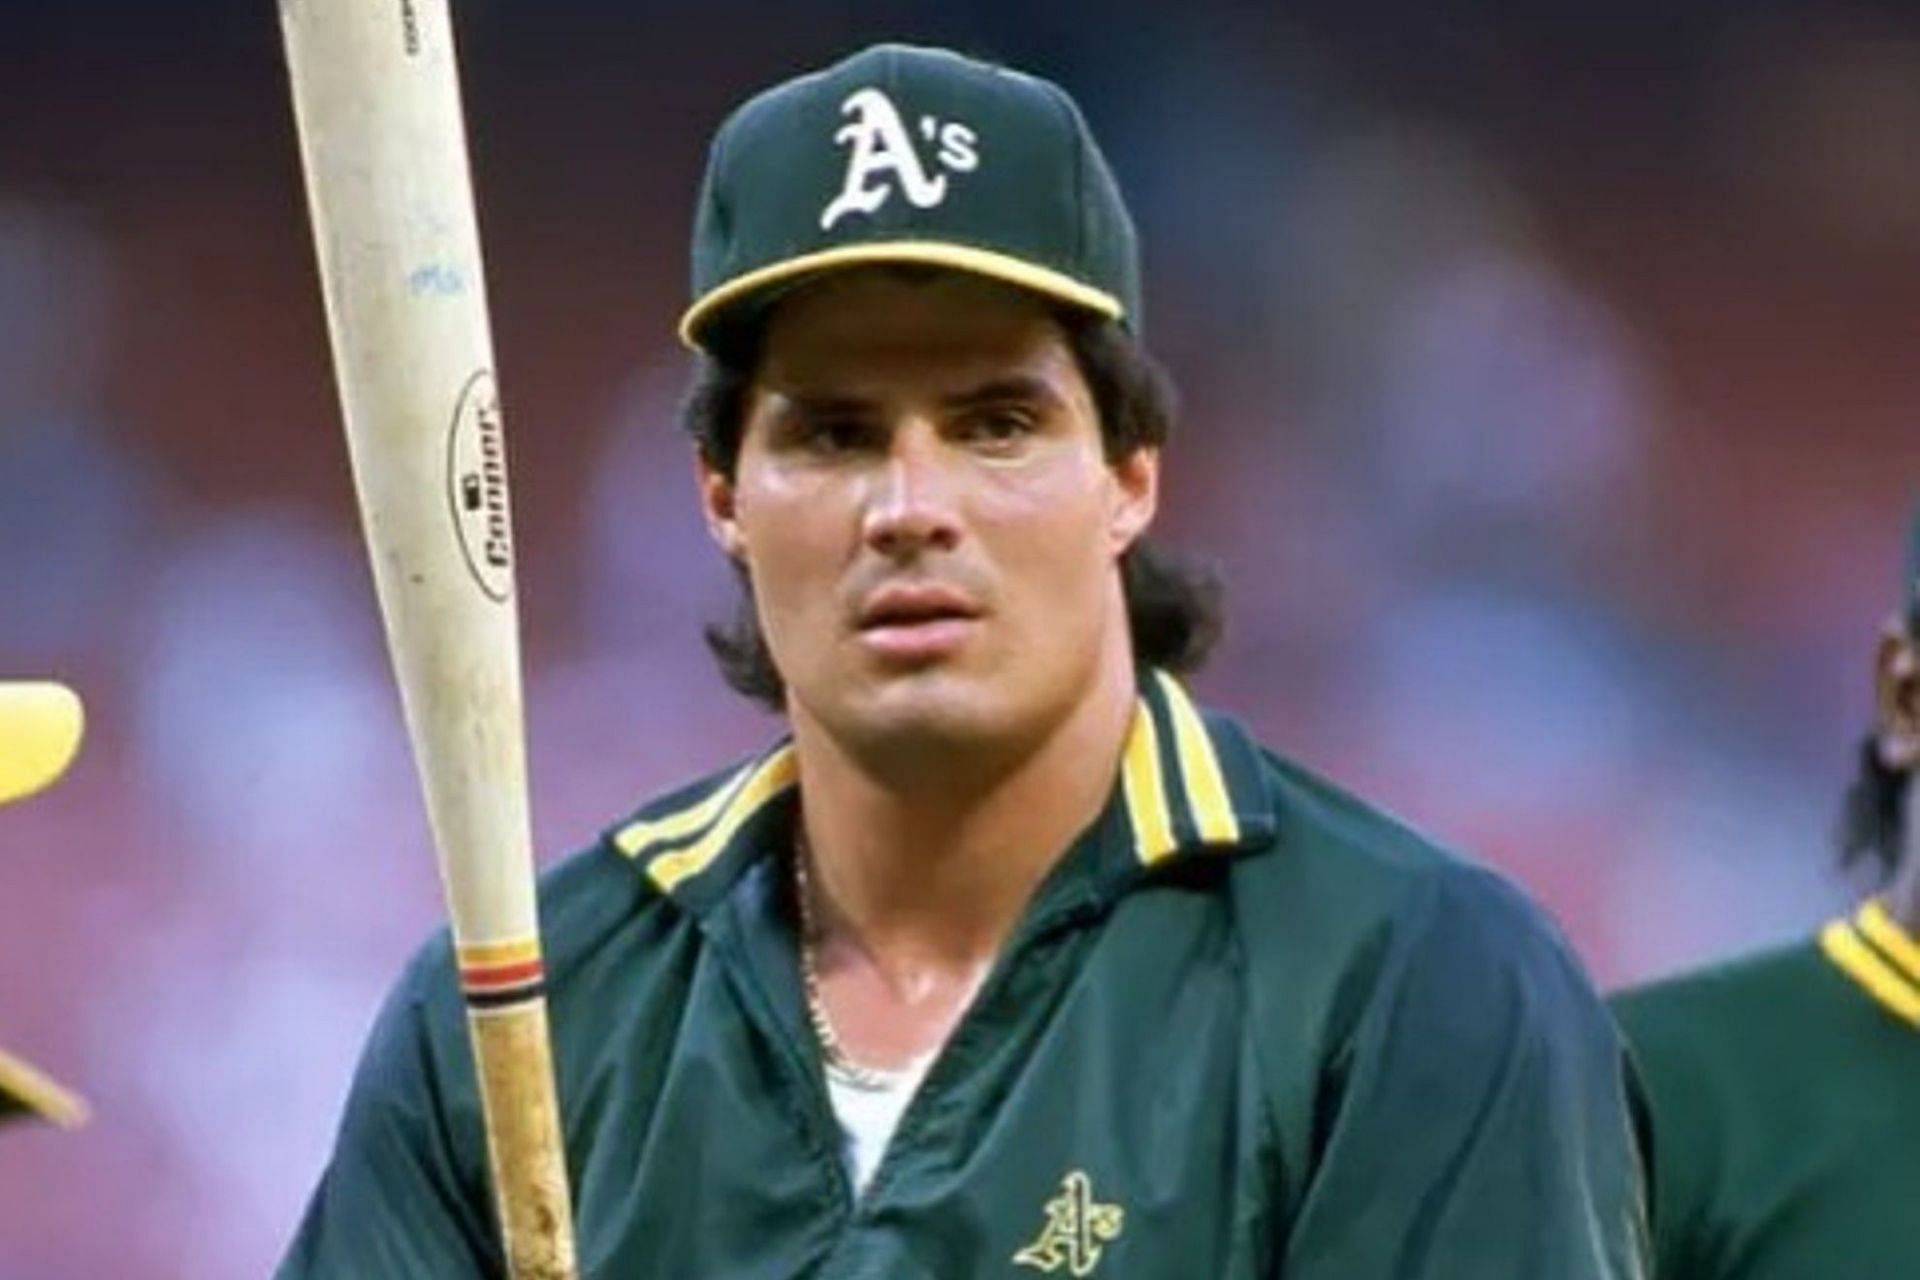 Former Oakland Athletics star Jose Canseco